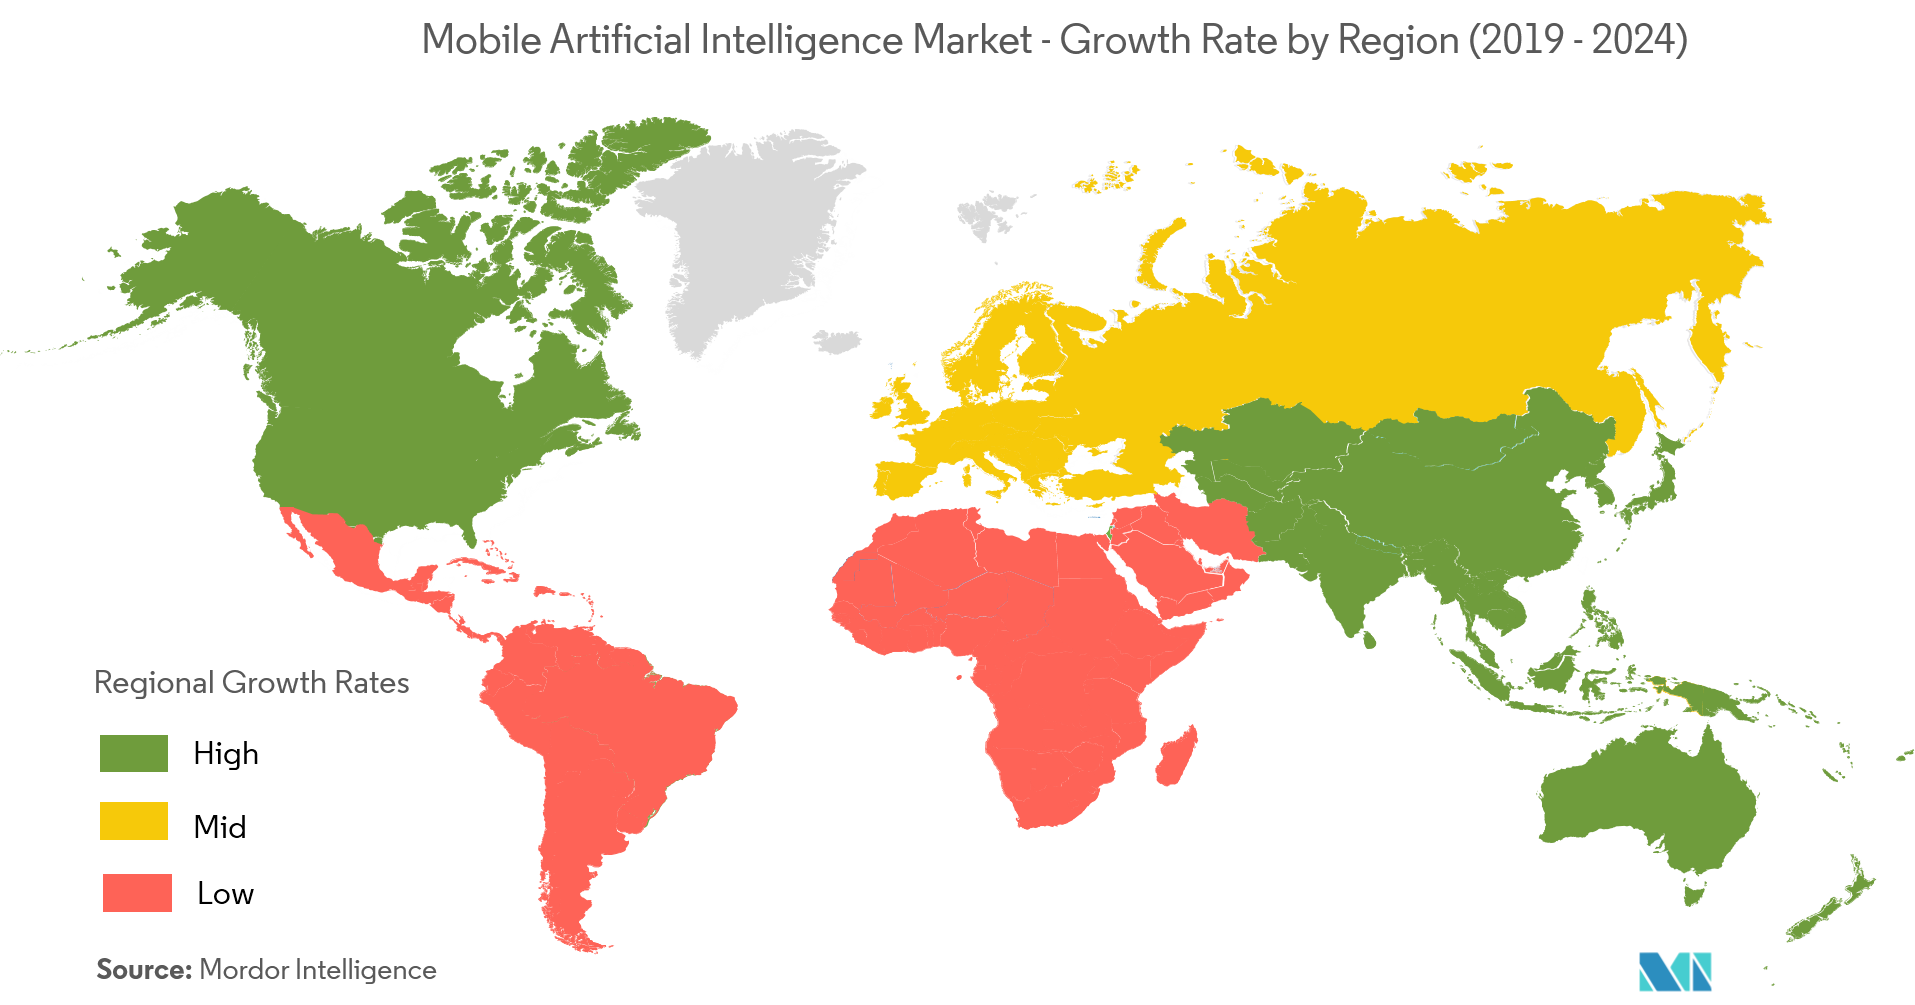 Mobile Artificial Intelligence Market Growth Rate